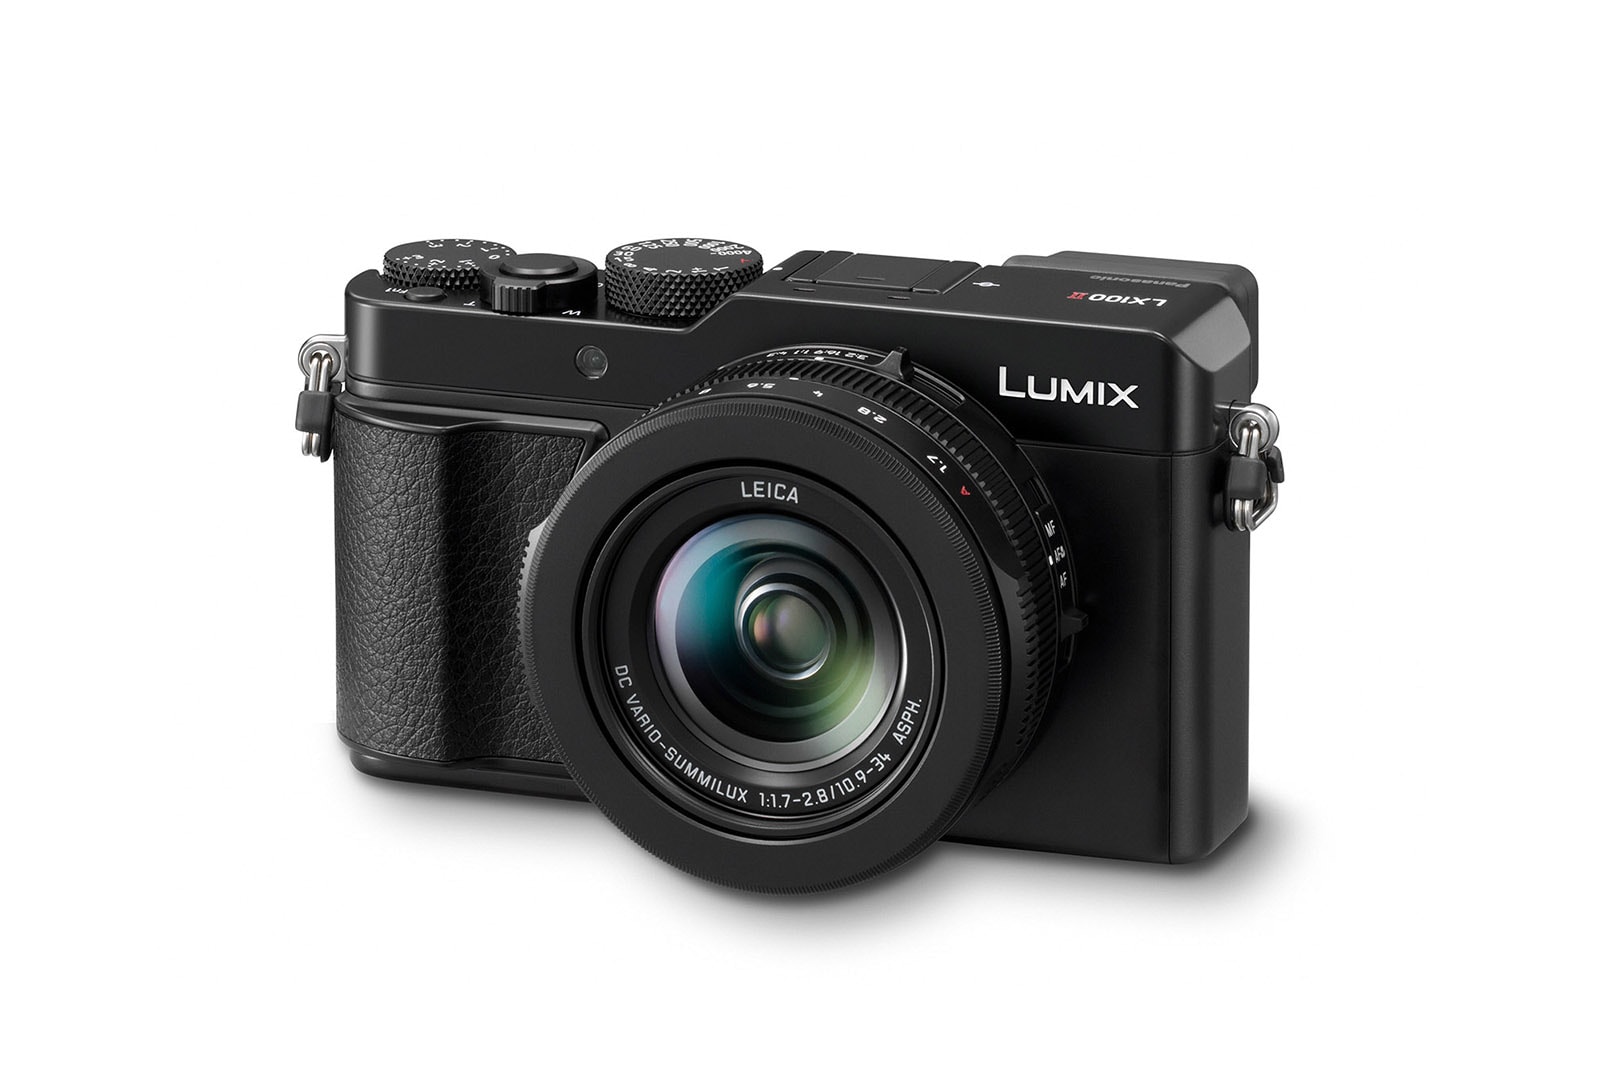 Panasonic LX100 II Compact Camera Details Specs Specifications Resolution 17 Four Thirds MOS Sensor 12.8 Megapixel Chip High ISO 25,600 Maximum Touchscreen Manually Focus Points Tech Technology